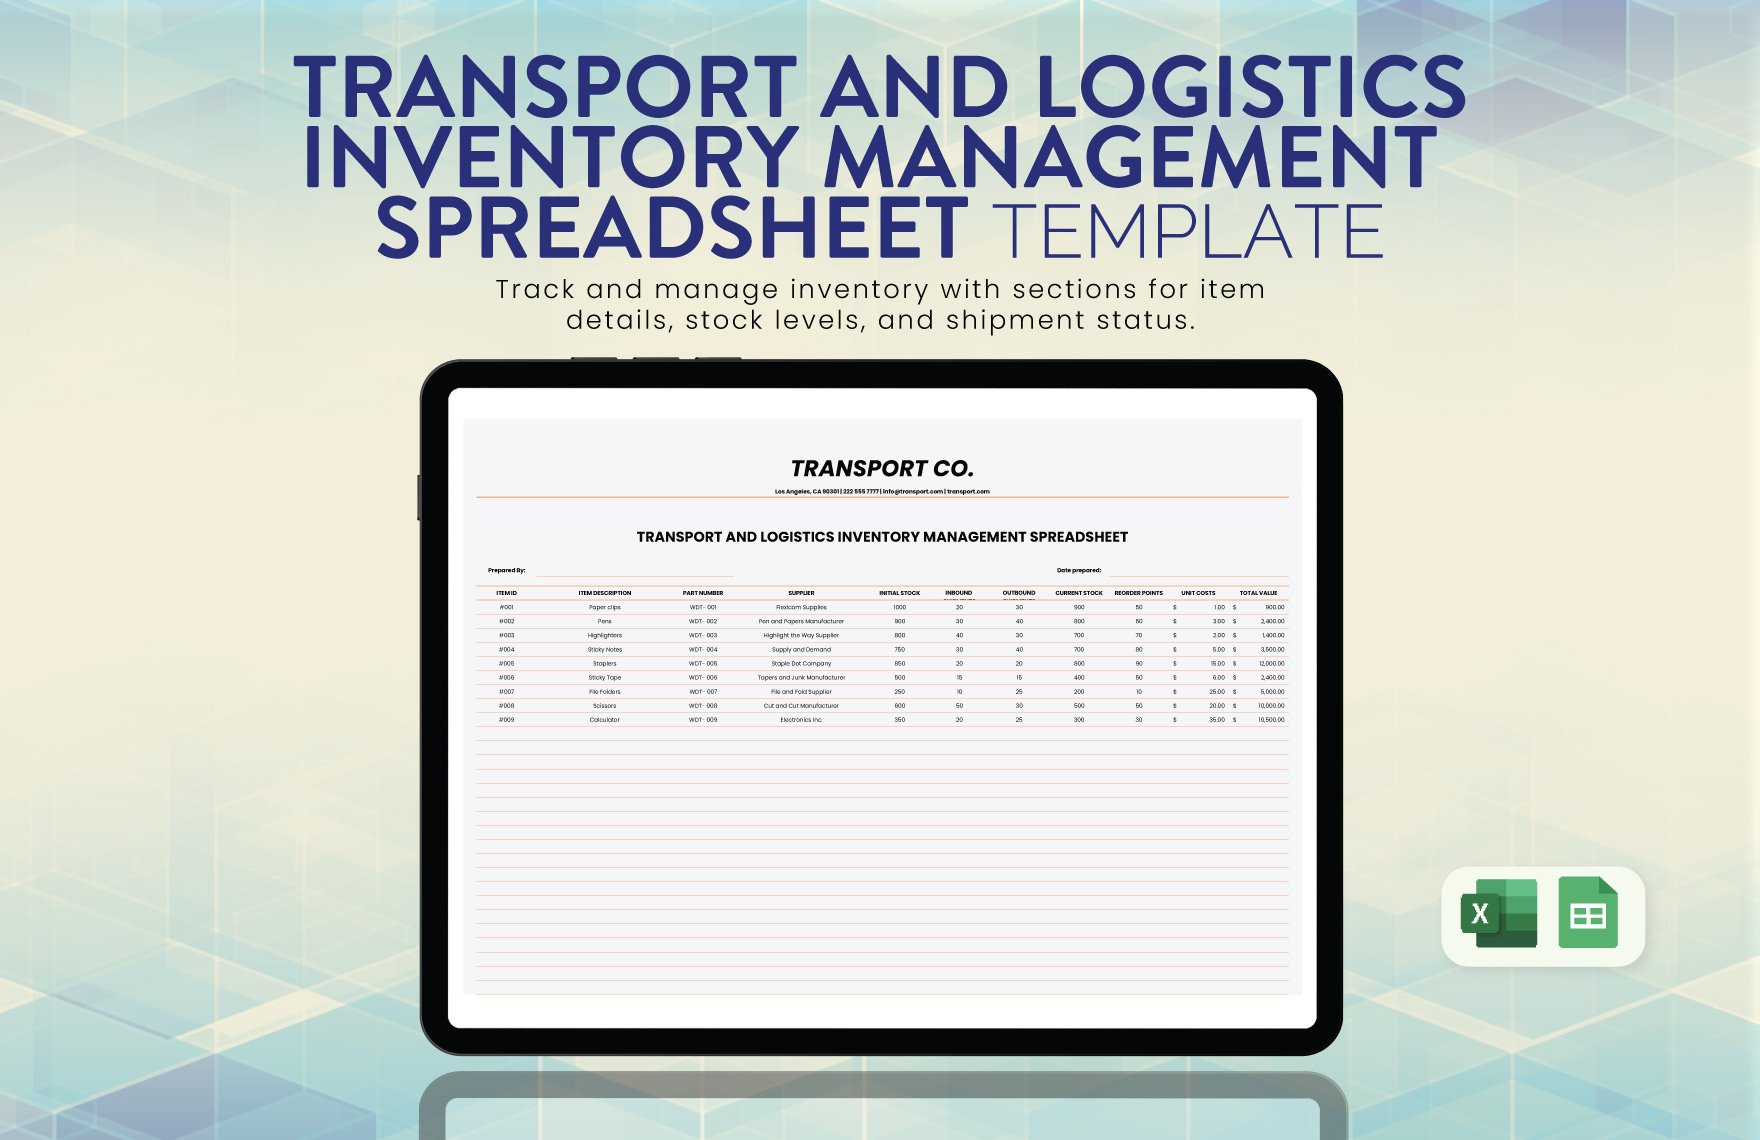 Free Transport and Logistics Inventory Management Spreadsheet Template in Excel, Google Sheets